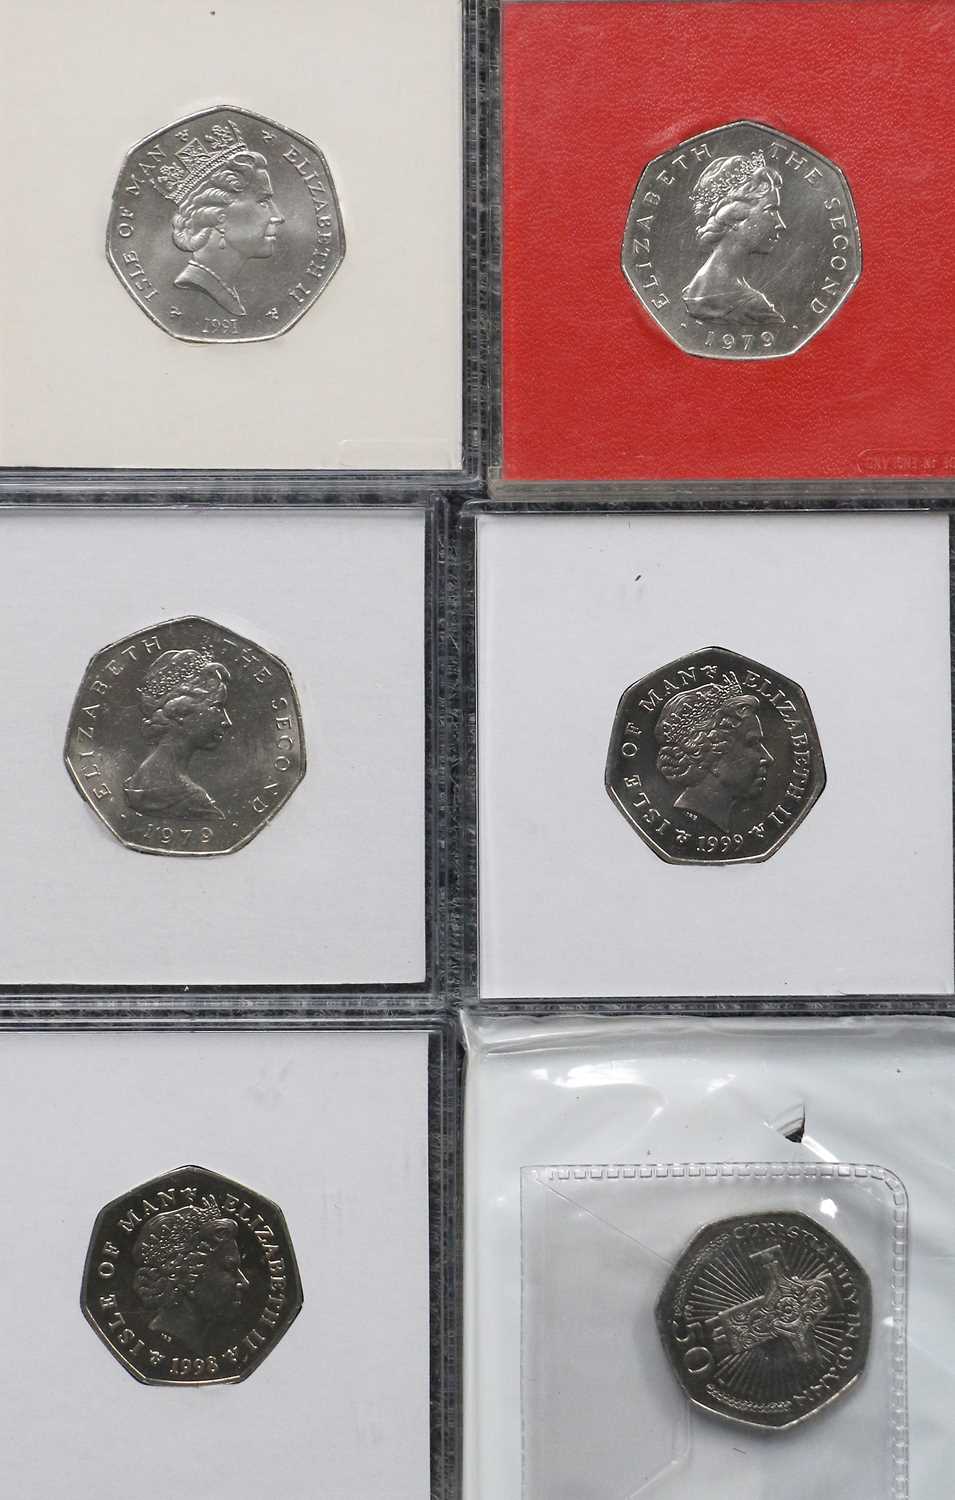 A Large Mixed Lot of UK and Isle of Man Coinage; comprising, commemorative £5 coins, Christmas 50ps, - Image 2 of 3